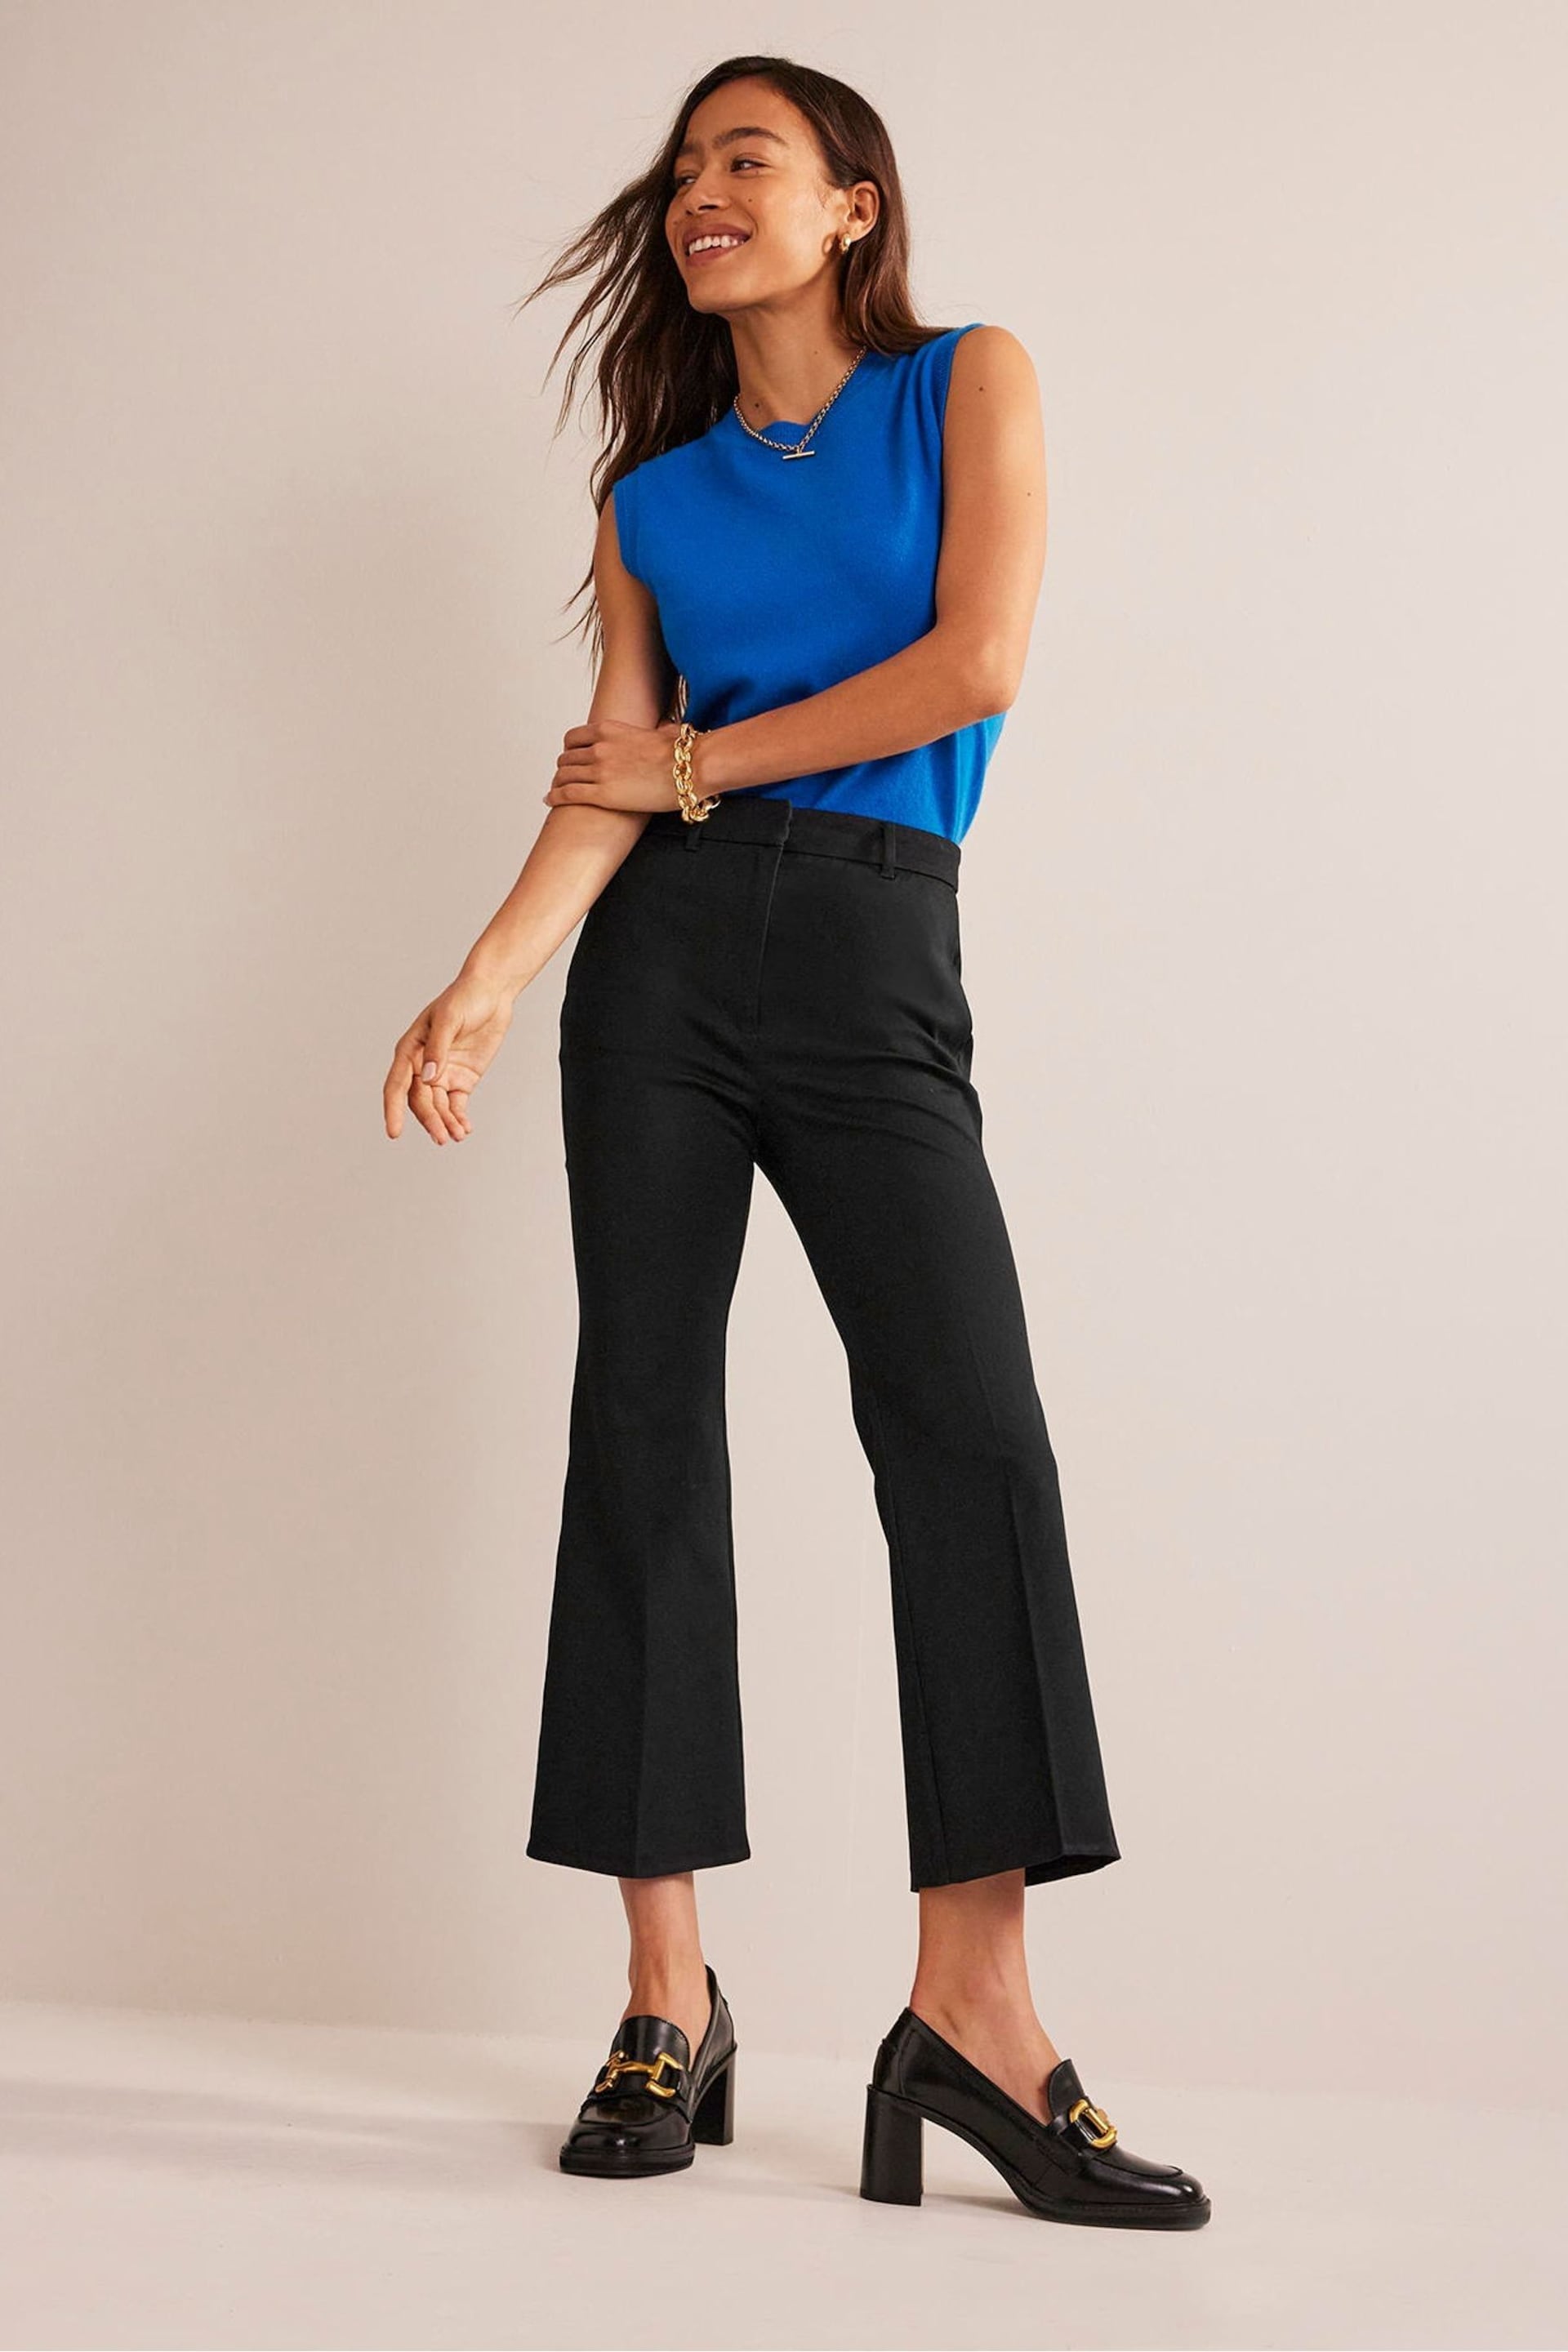 Boden Black Chelsea Bi-Stretch Trousers - Image 3 of 4